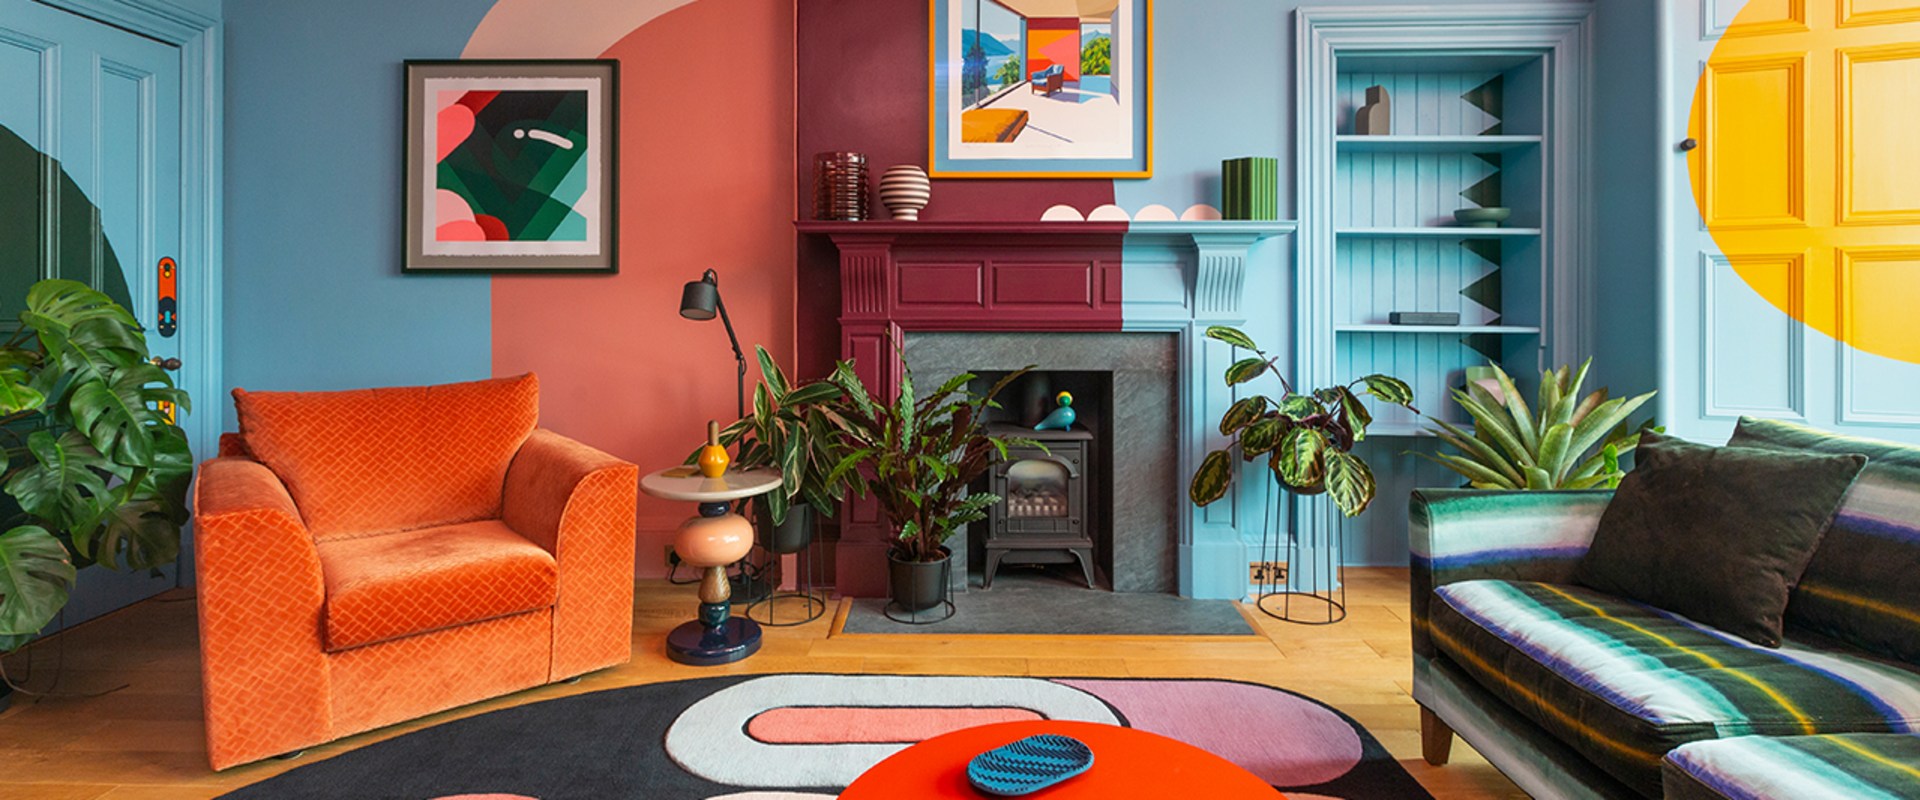 What are some tips for decorating a house with bold colors?